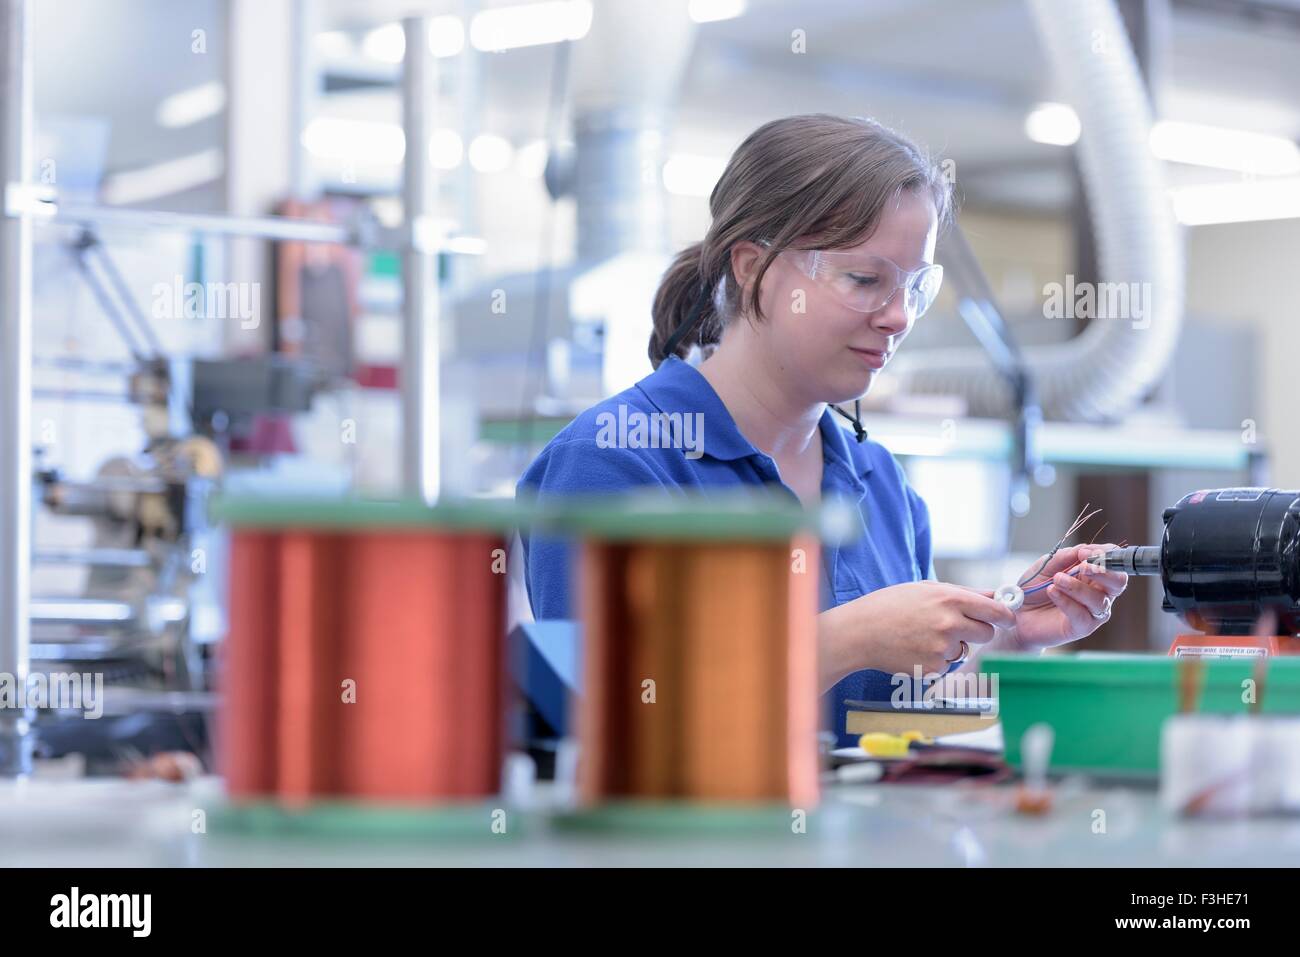 Female worker assembling electromagnetic coils in electronics factory Stock Photo